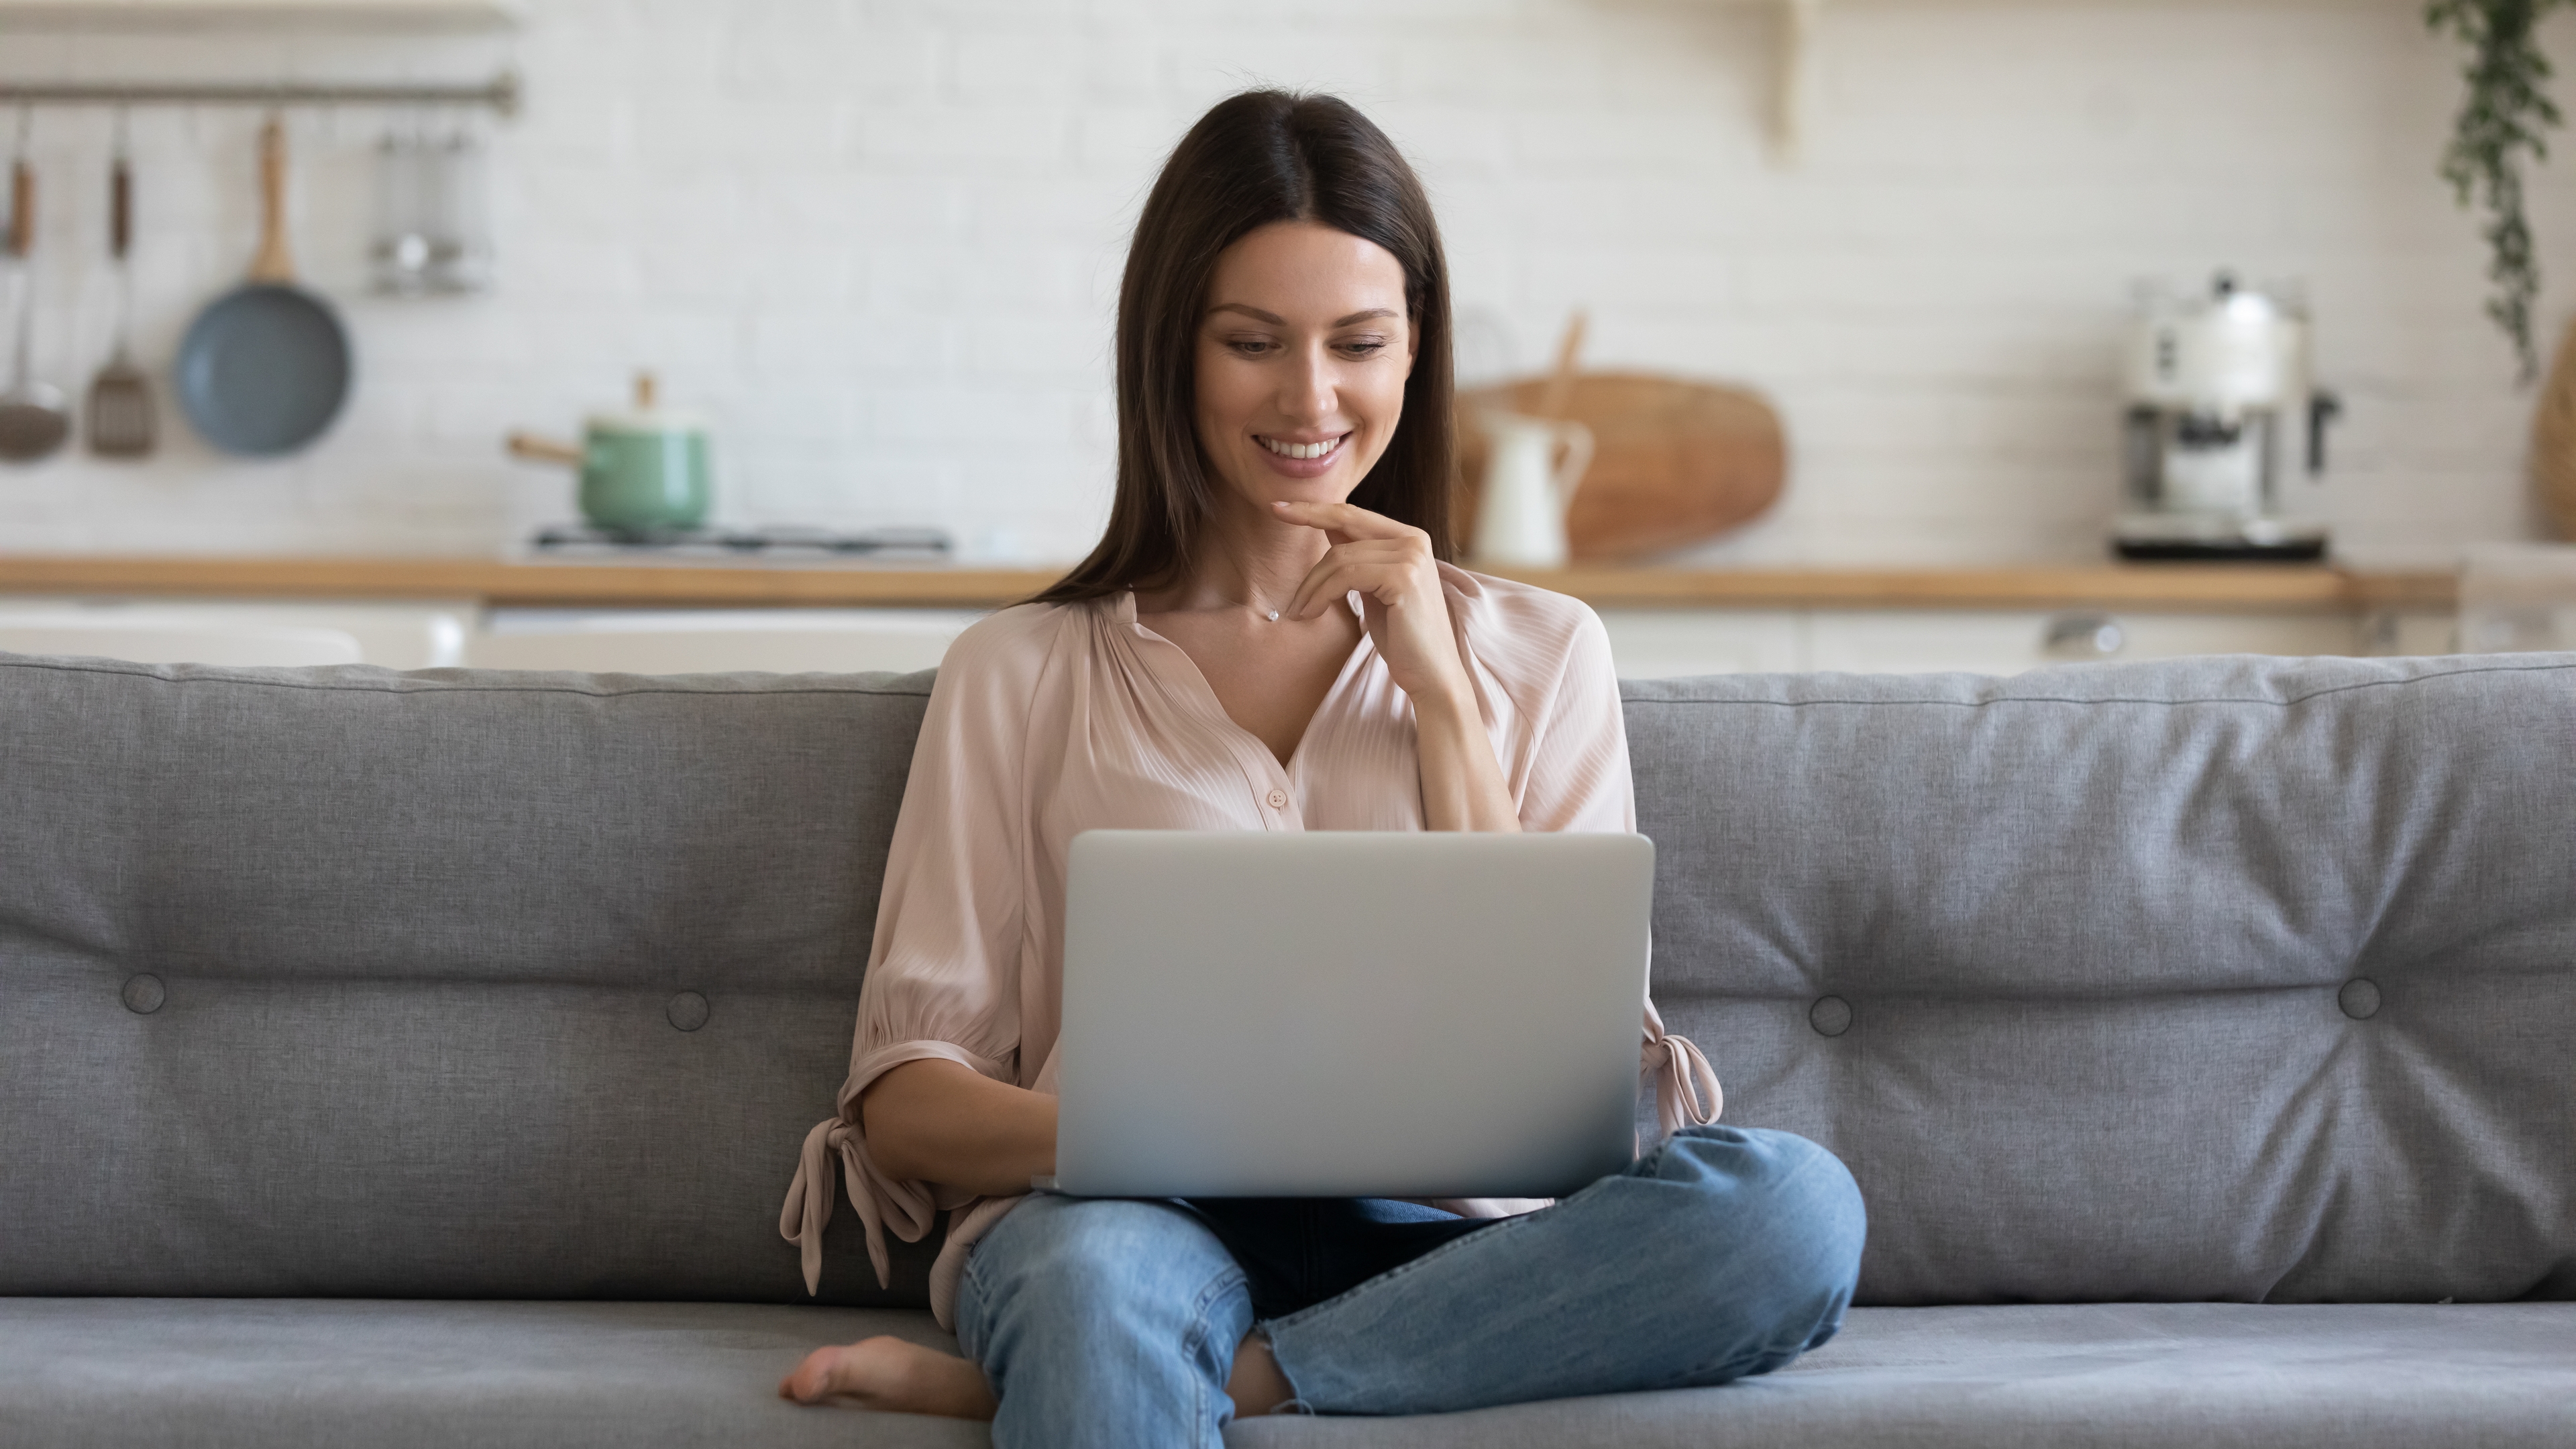 Woman sitting on chair using laptop